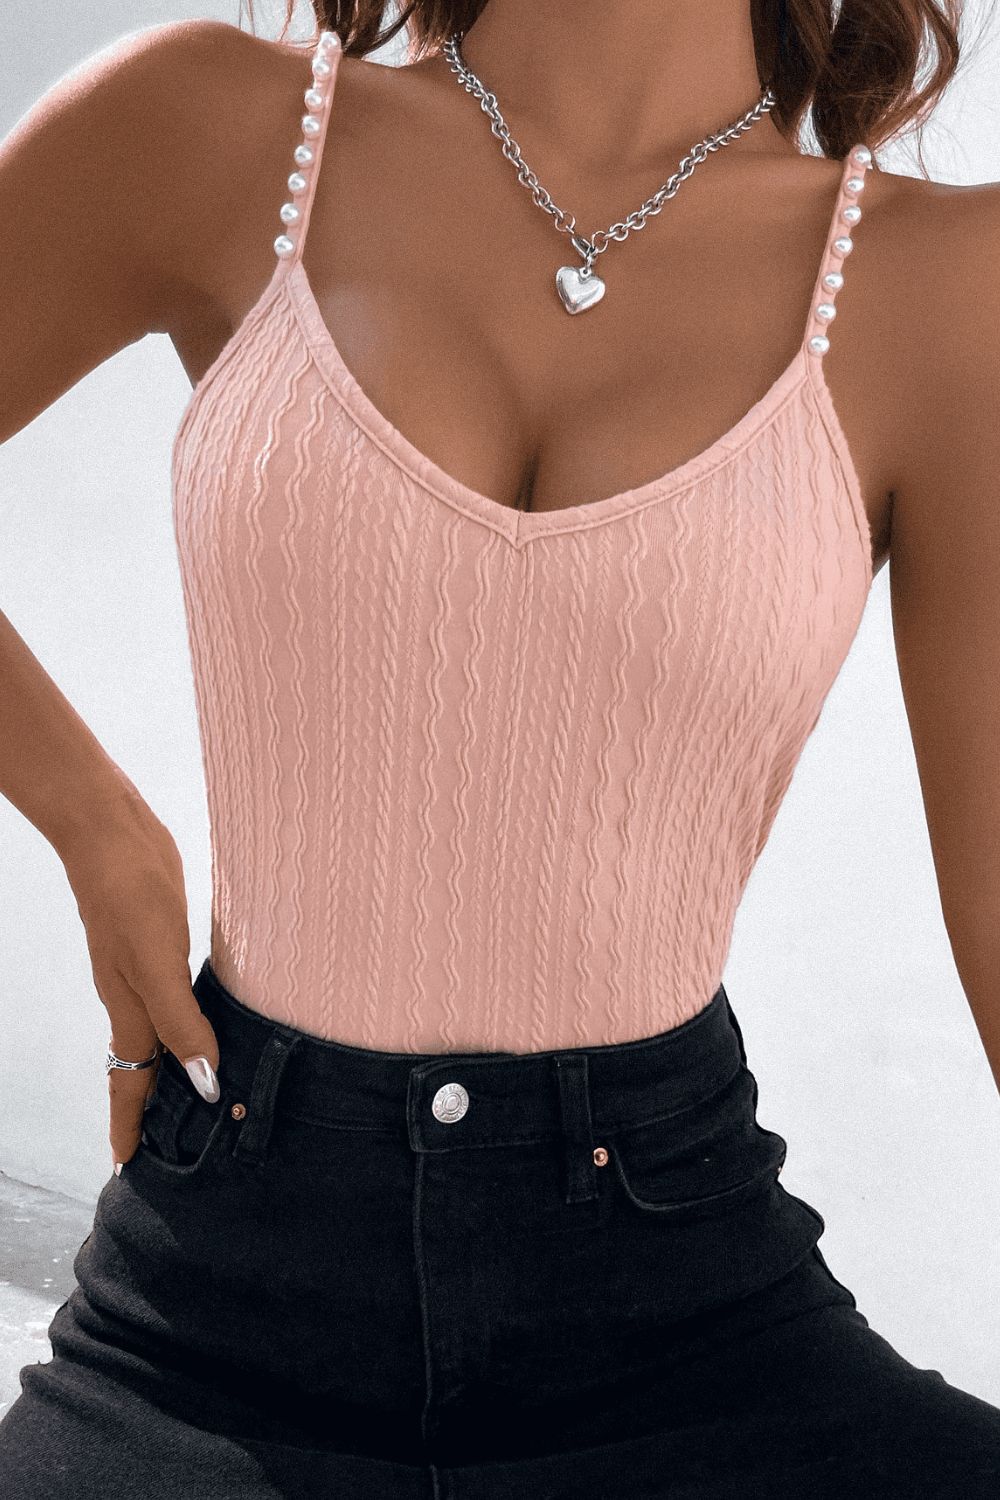 Beads Detail Spaghetti Straps Cable-Knit Cami - Women’s Clothing & Accessories - Shirts & Tops - 3 - 2024